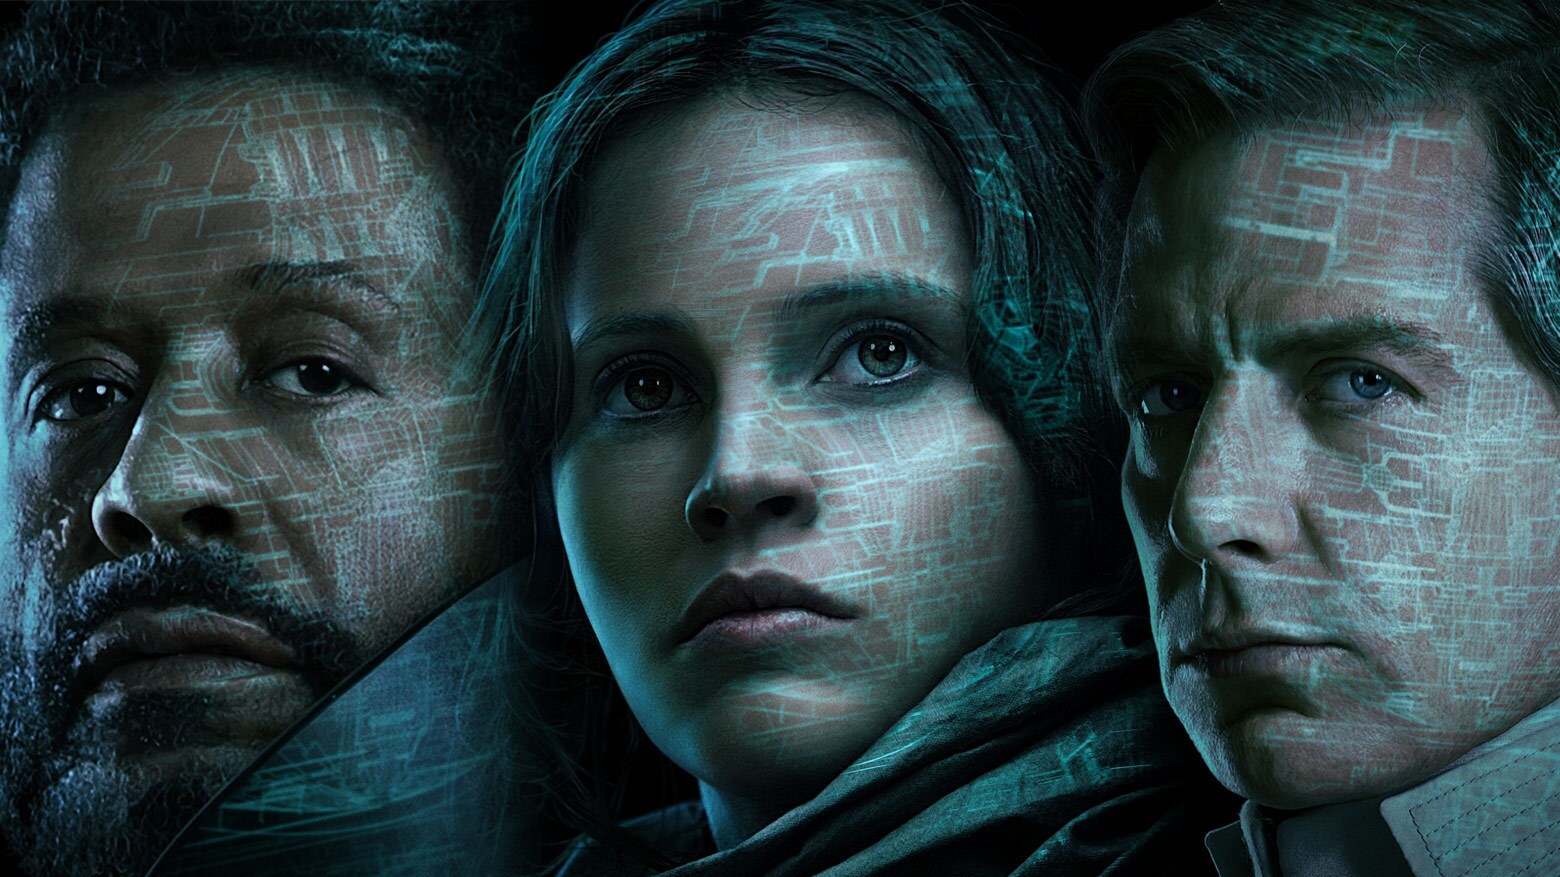 Rogue One: A Star Wars Story Character Posters Revealed - Complete Gallery